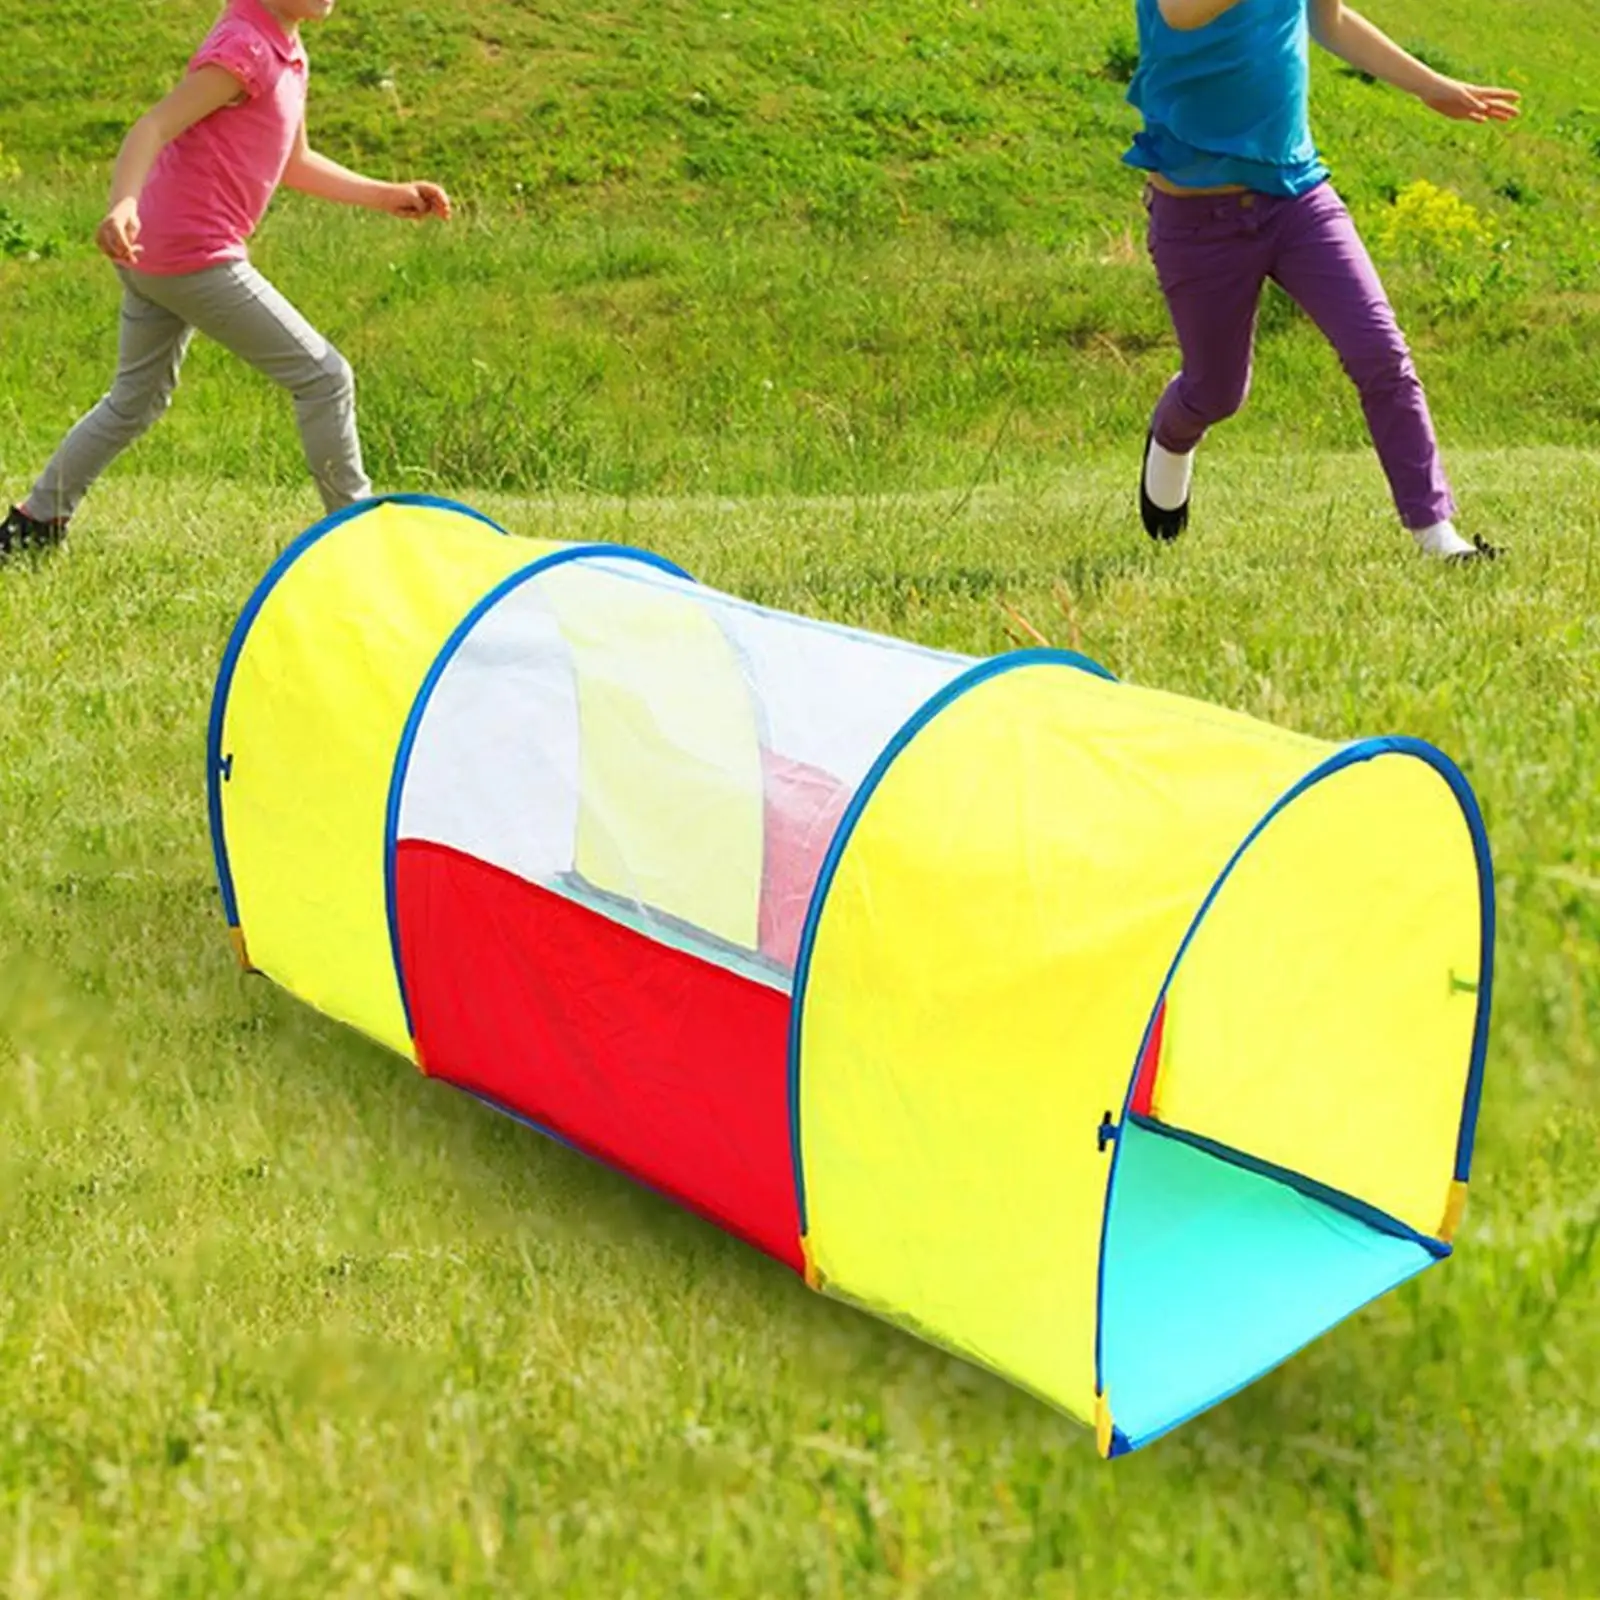 Portable Play Tent Toy Climbing Toy Indoor Outdoor Game for Toddlers Girls